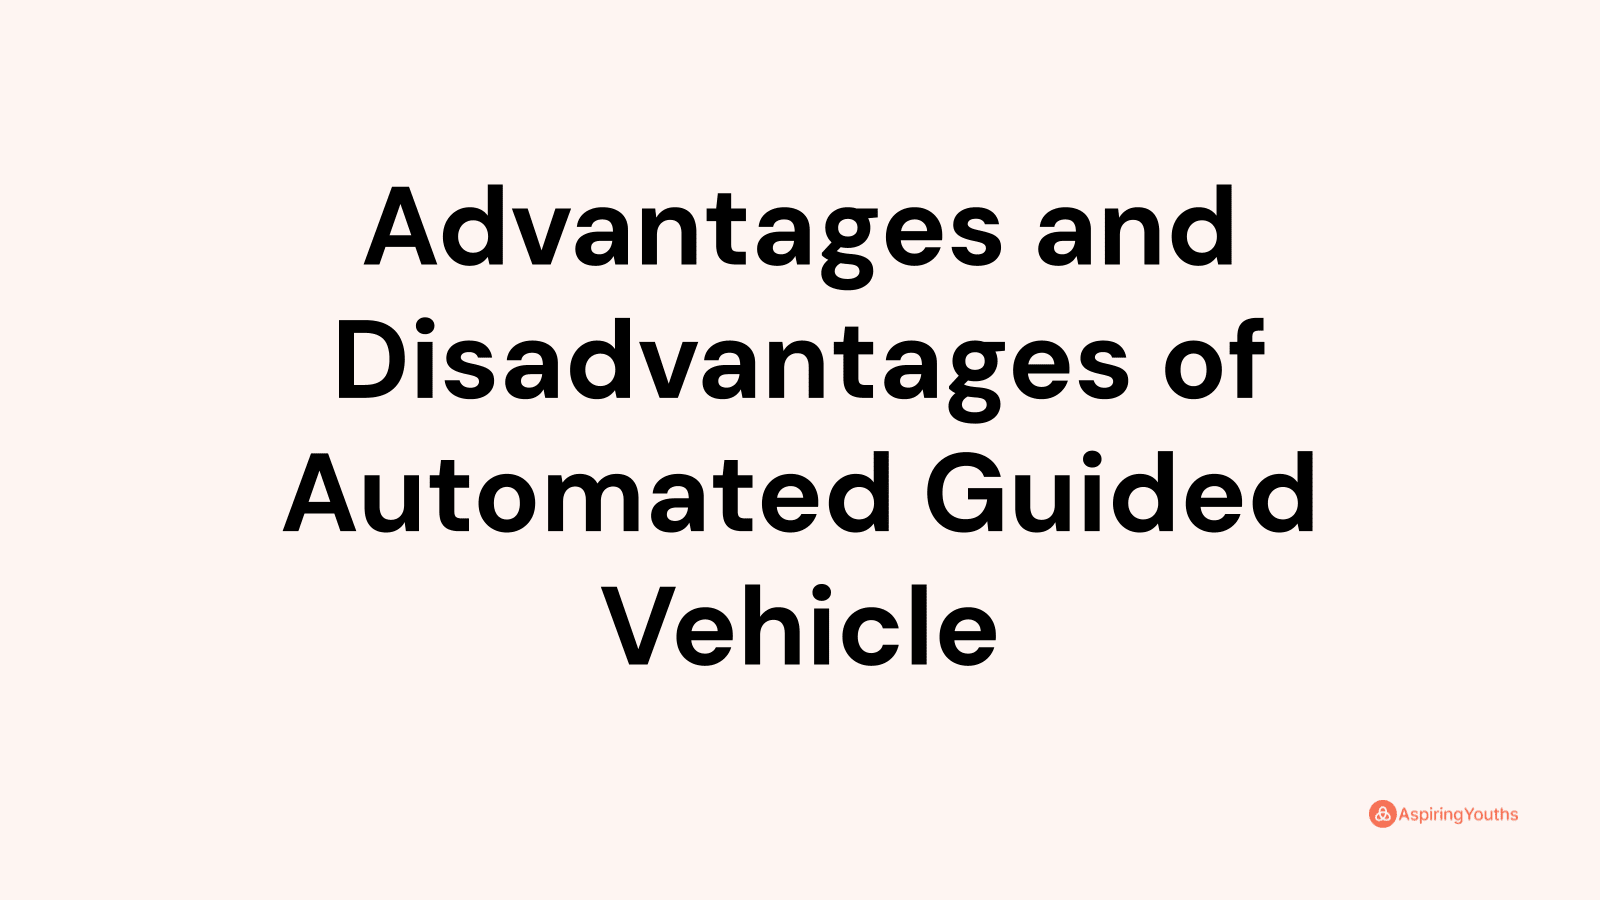 Advantages and disadvantages of Automated Guided Vehicle